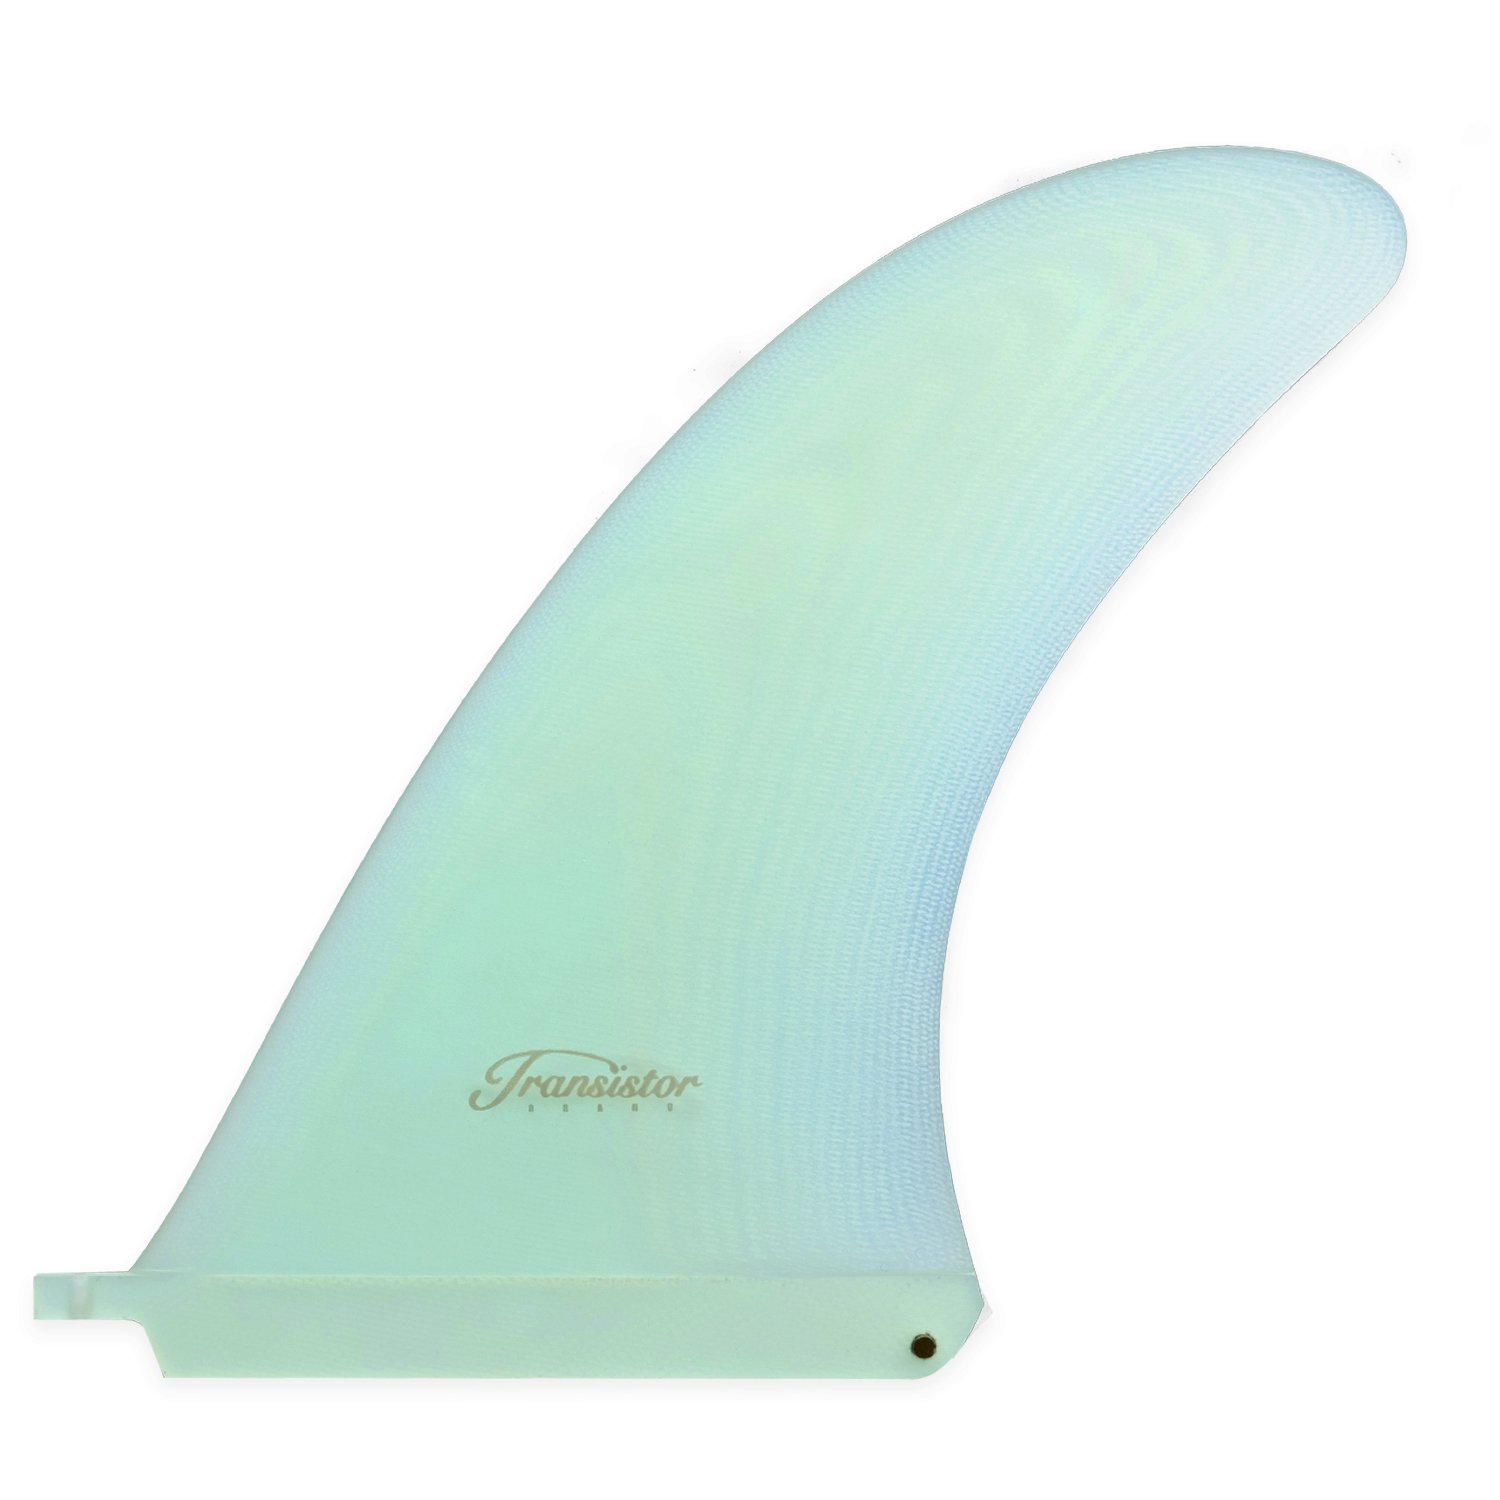 <img class='new_mark_img1' src='https://img.shop-pro.jp/img/new/icons3.gif' style='border:none;display:inline;margin:0px;padding:0px;width:auto;' />TRANSISTOR BRAND  / YS Model For Longboard (2 / 2顼